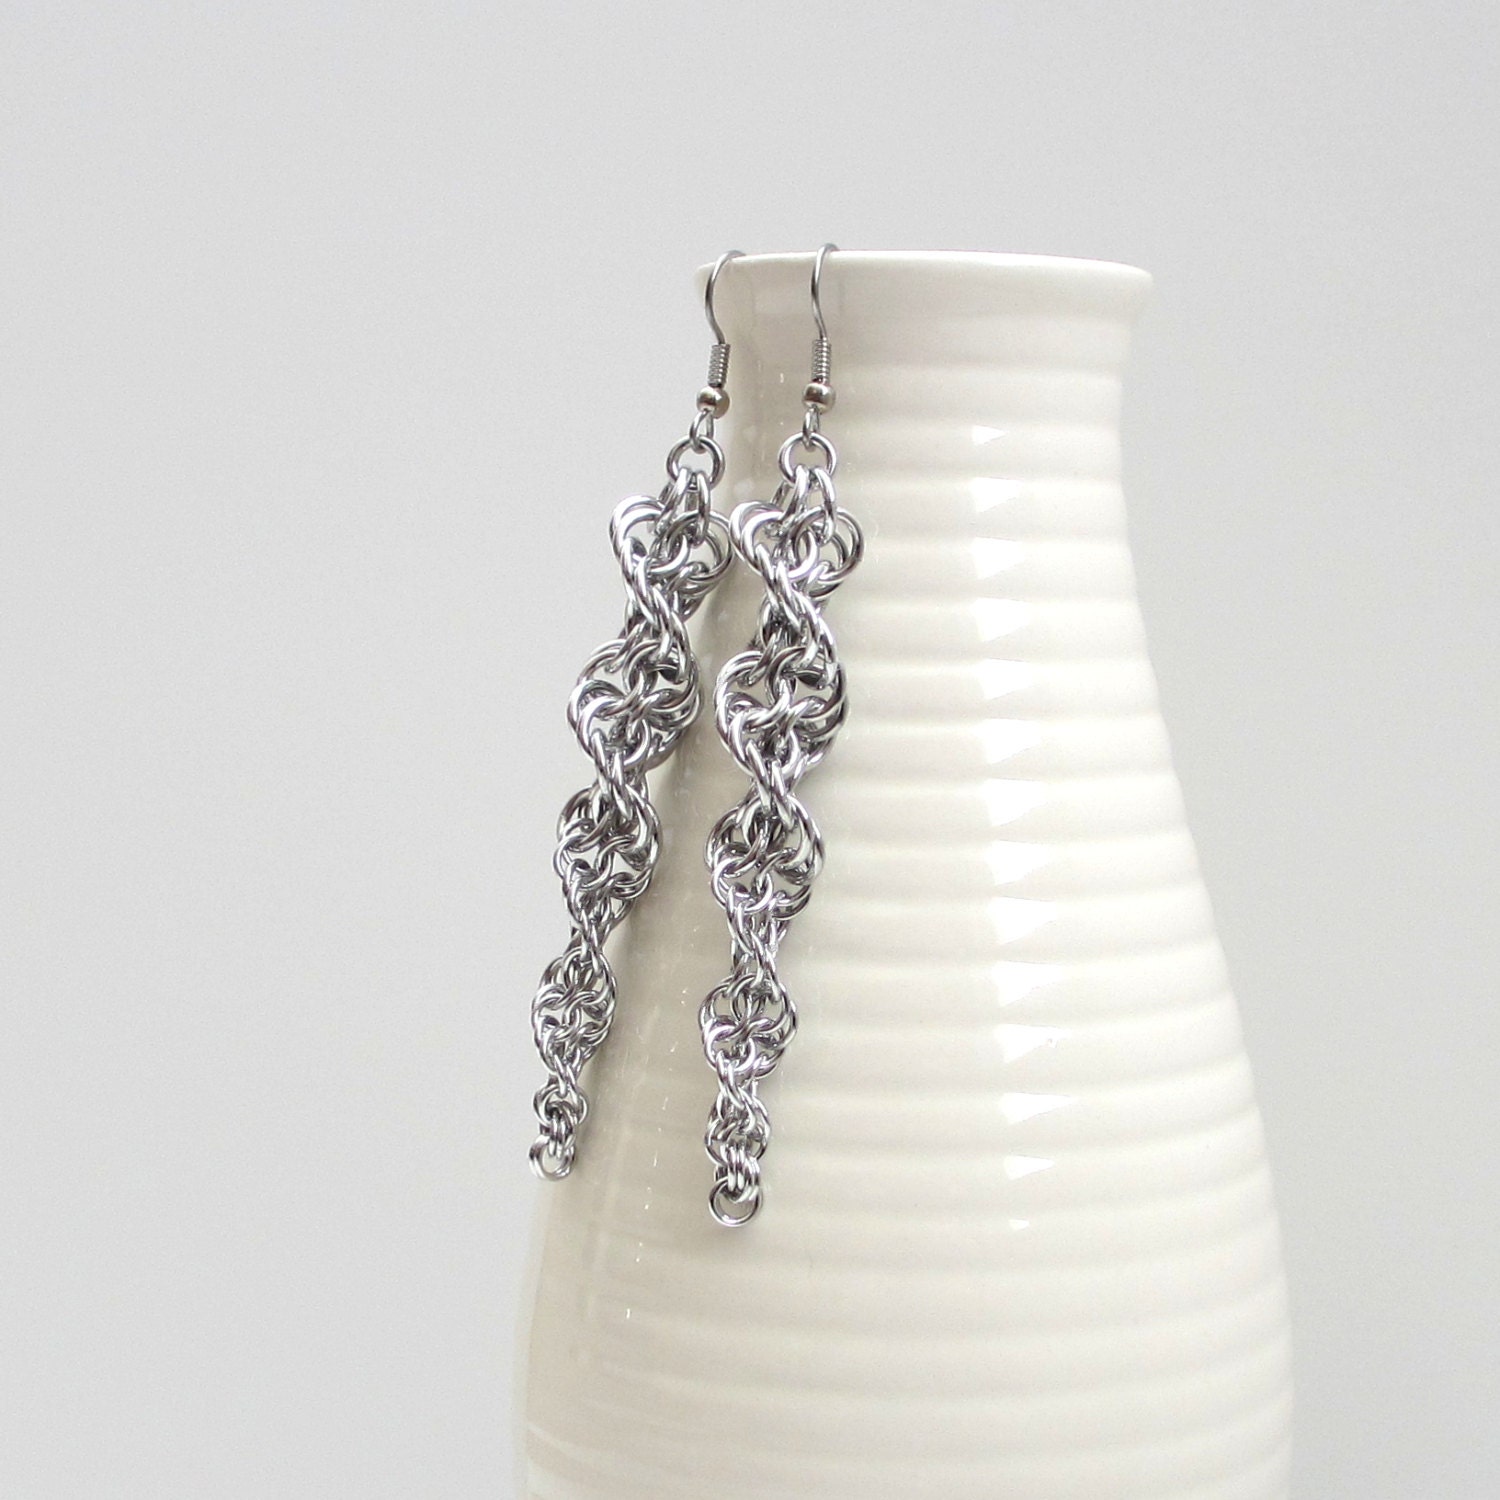 Inverted spiral chainmail earrings silver aluminum